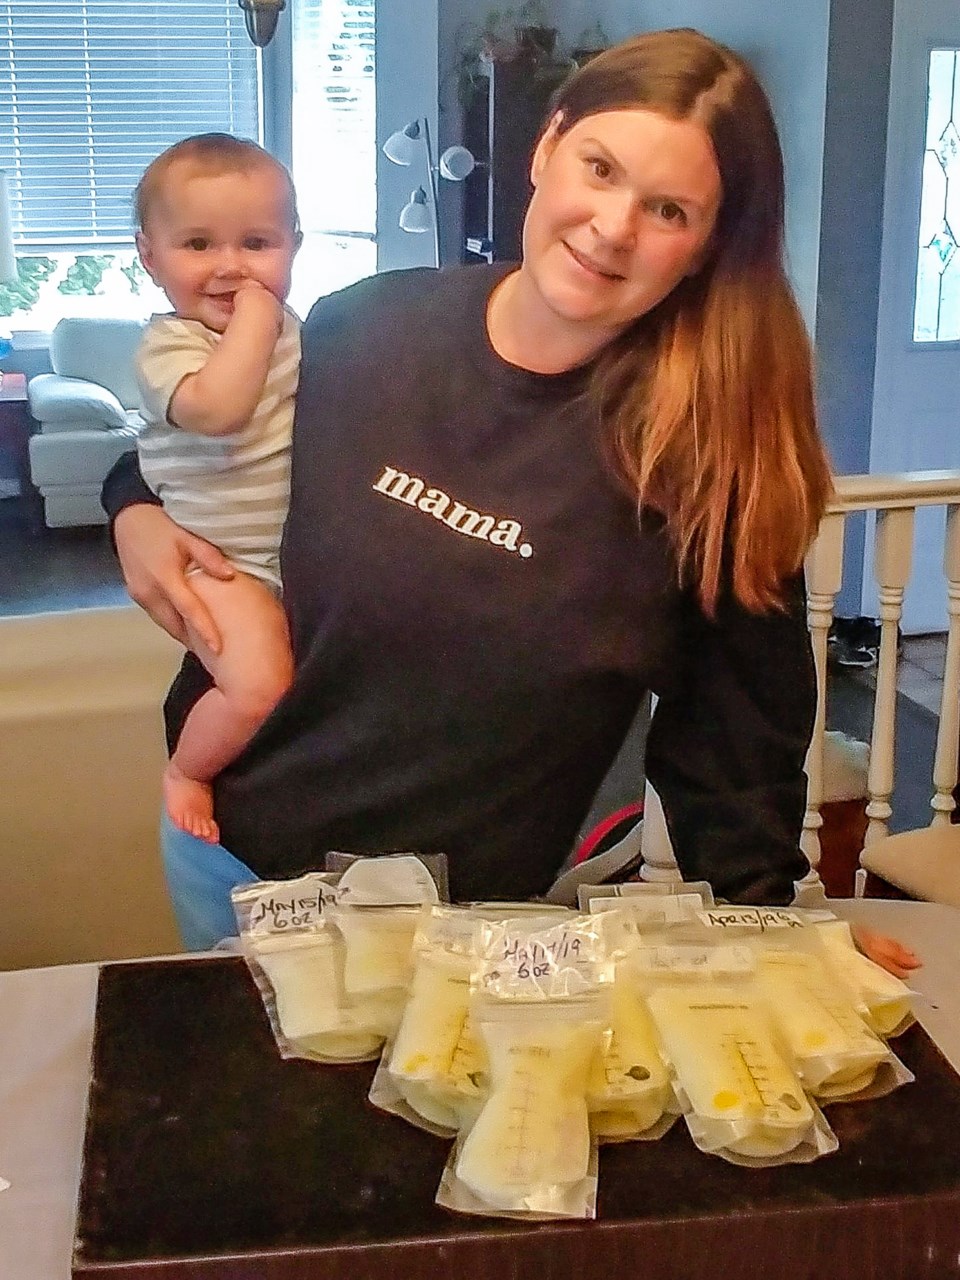 Jodi Neibert says she donated 650 ounces of milk to the Coquitlam woman in December 2018